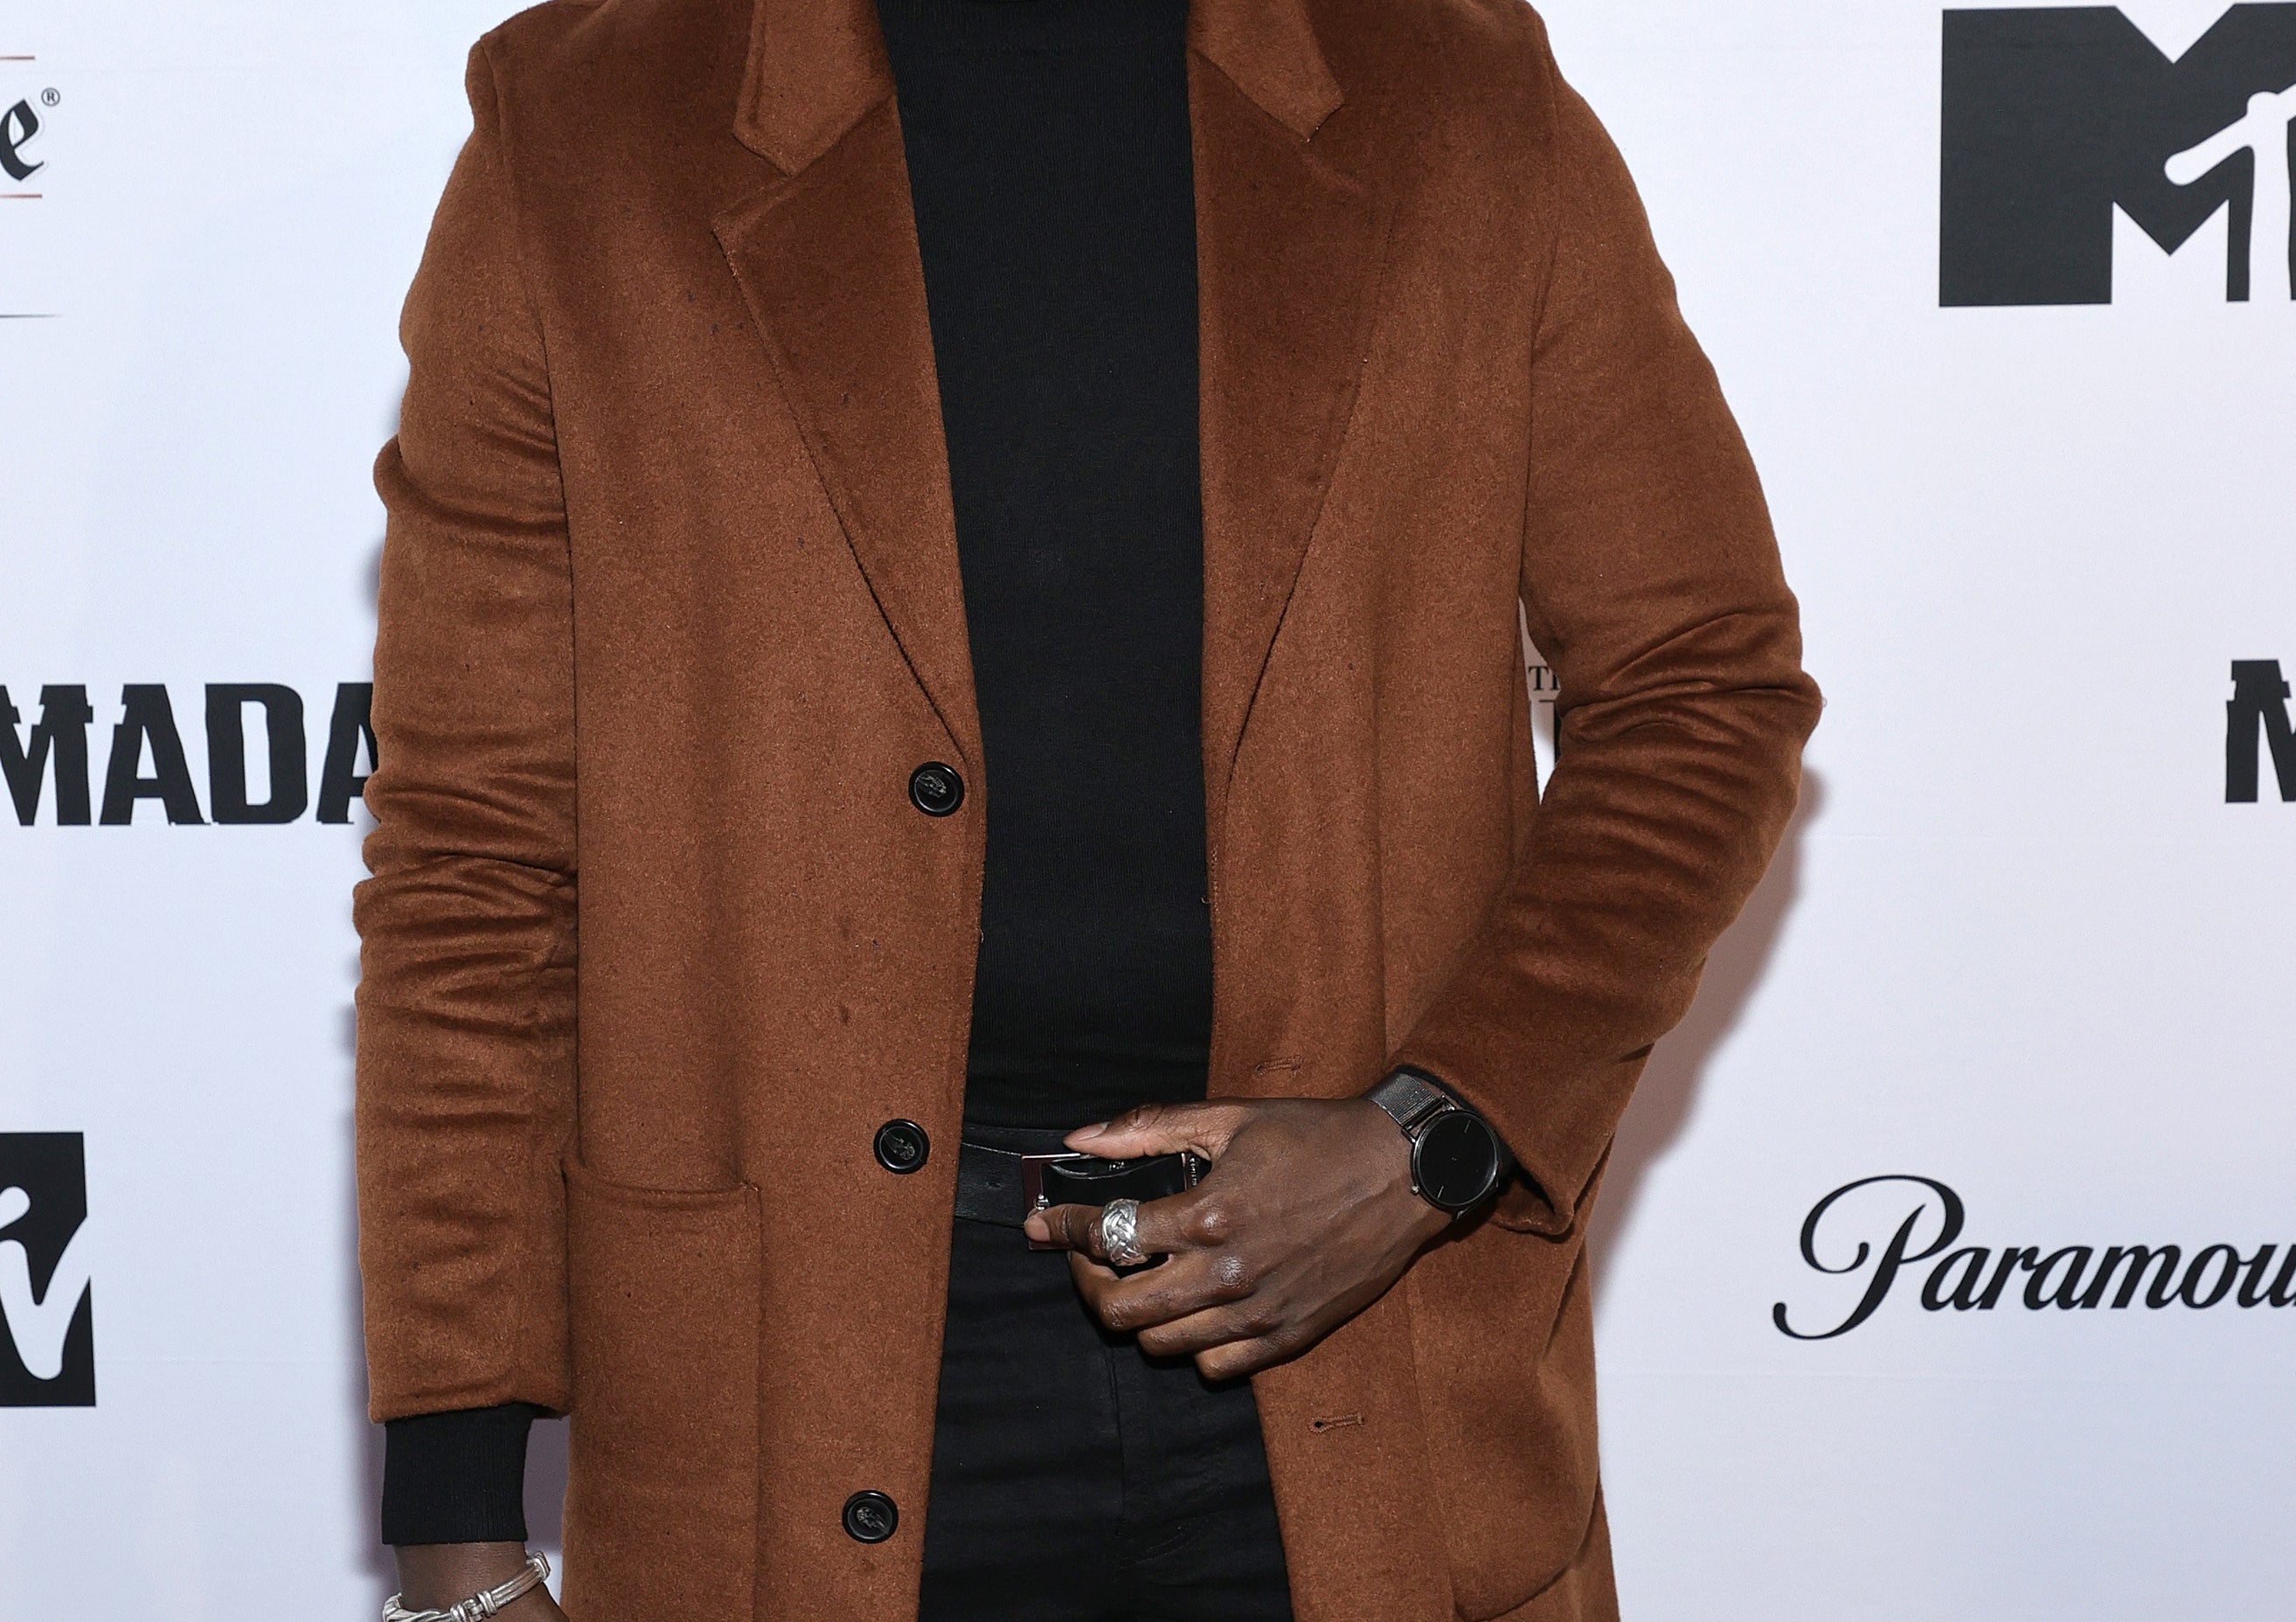 Loic Mabanza in a turtleneck and blazer